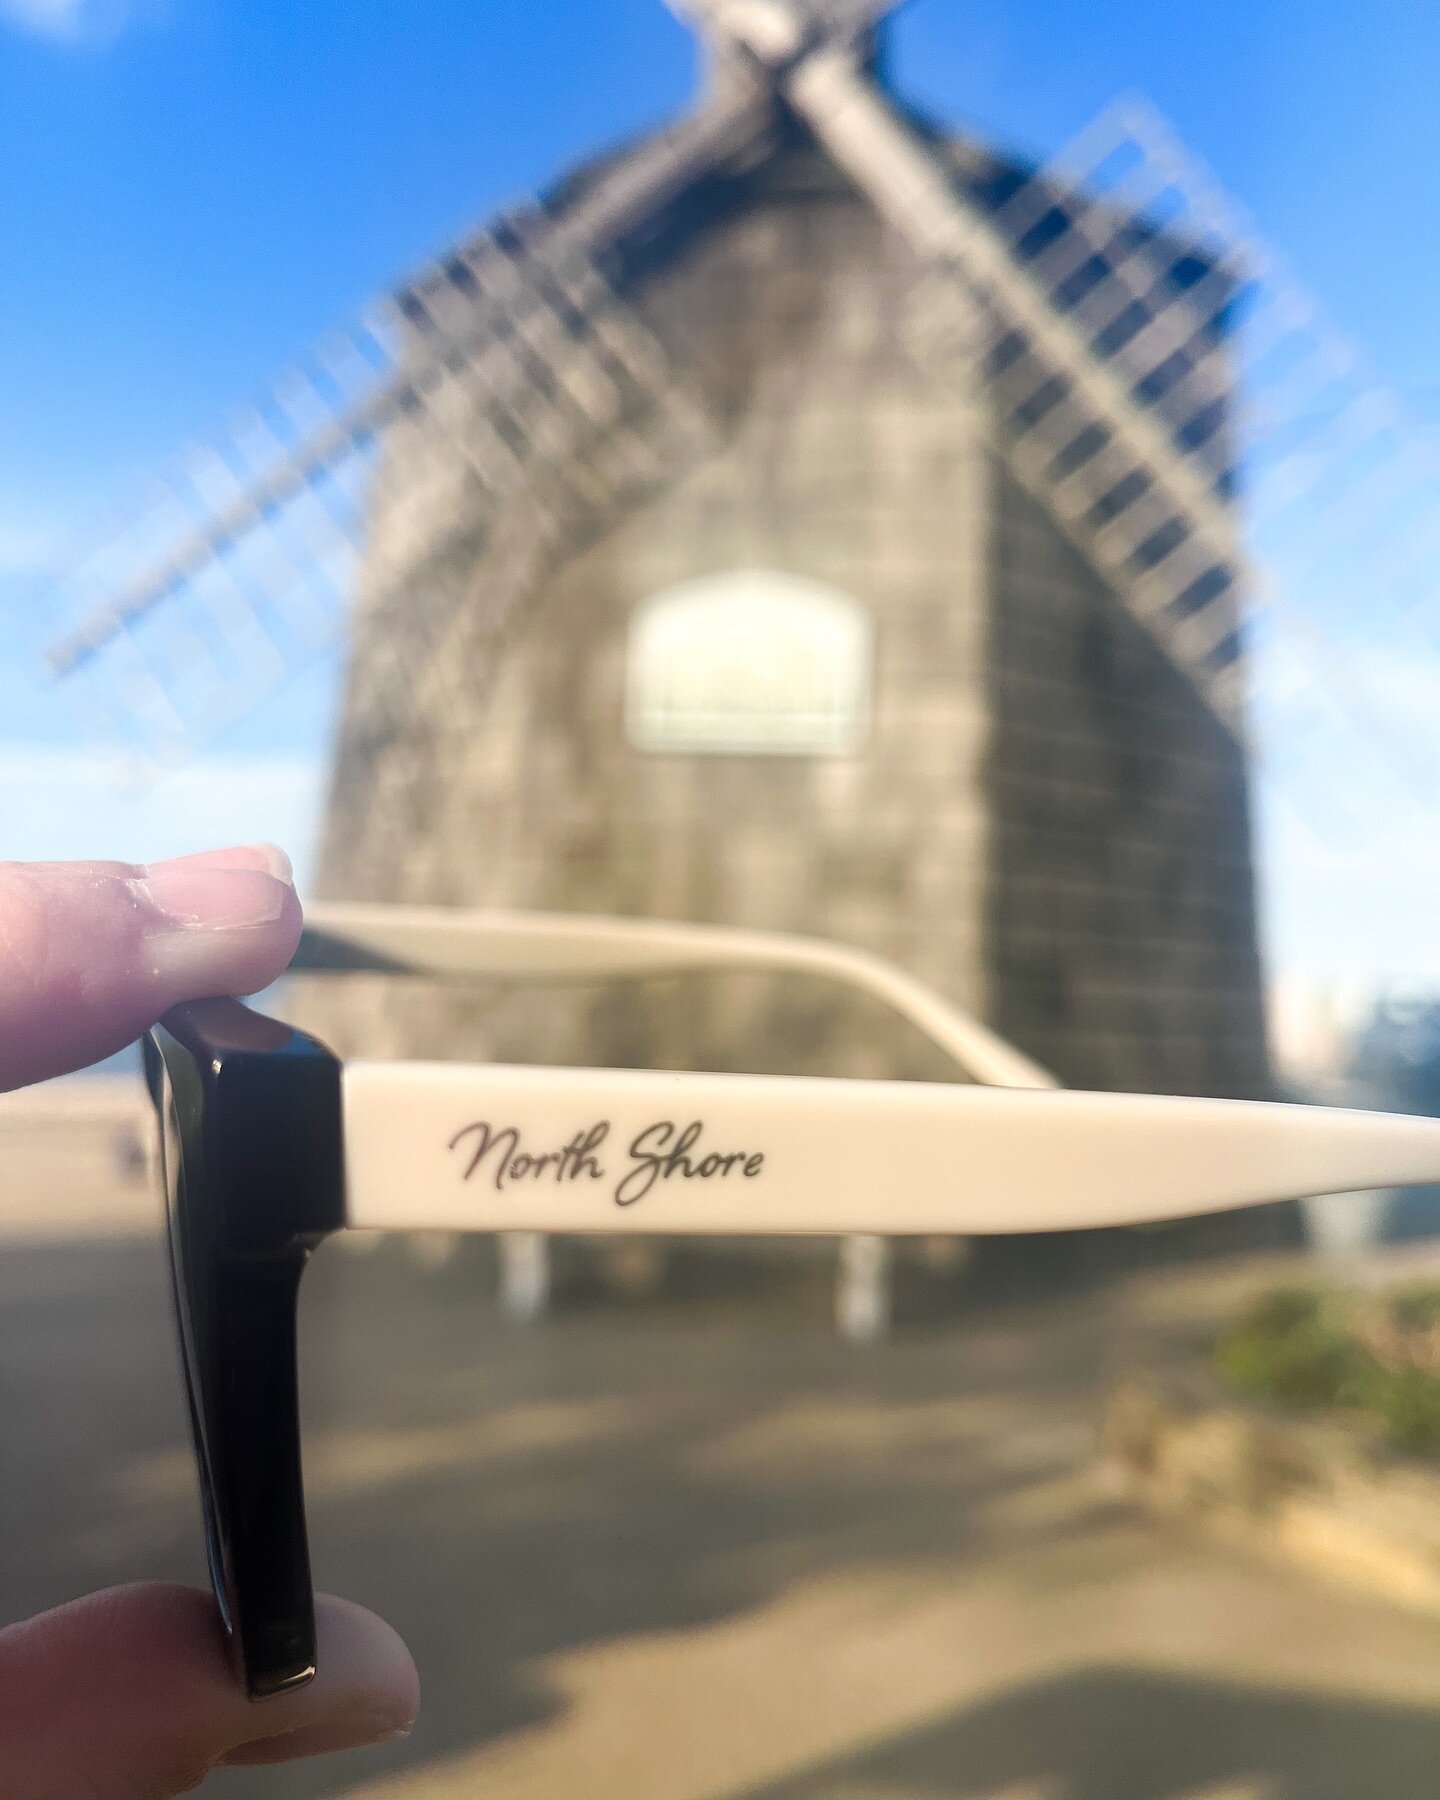 Happy February! One month closer to spring/summer ☀️We are SO excited for sunnier days and all that&rsquo;s to come in 2024 😎

#sunglassesstyle 
#sagharbor 
#womenowned 
#smallbusiness 
#boutiqueshopping 
#longisland 
#windmill